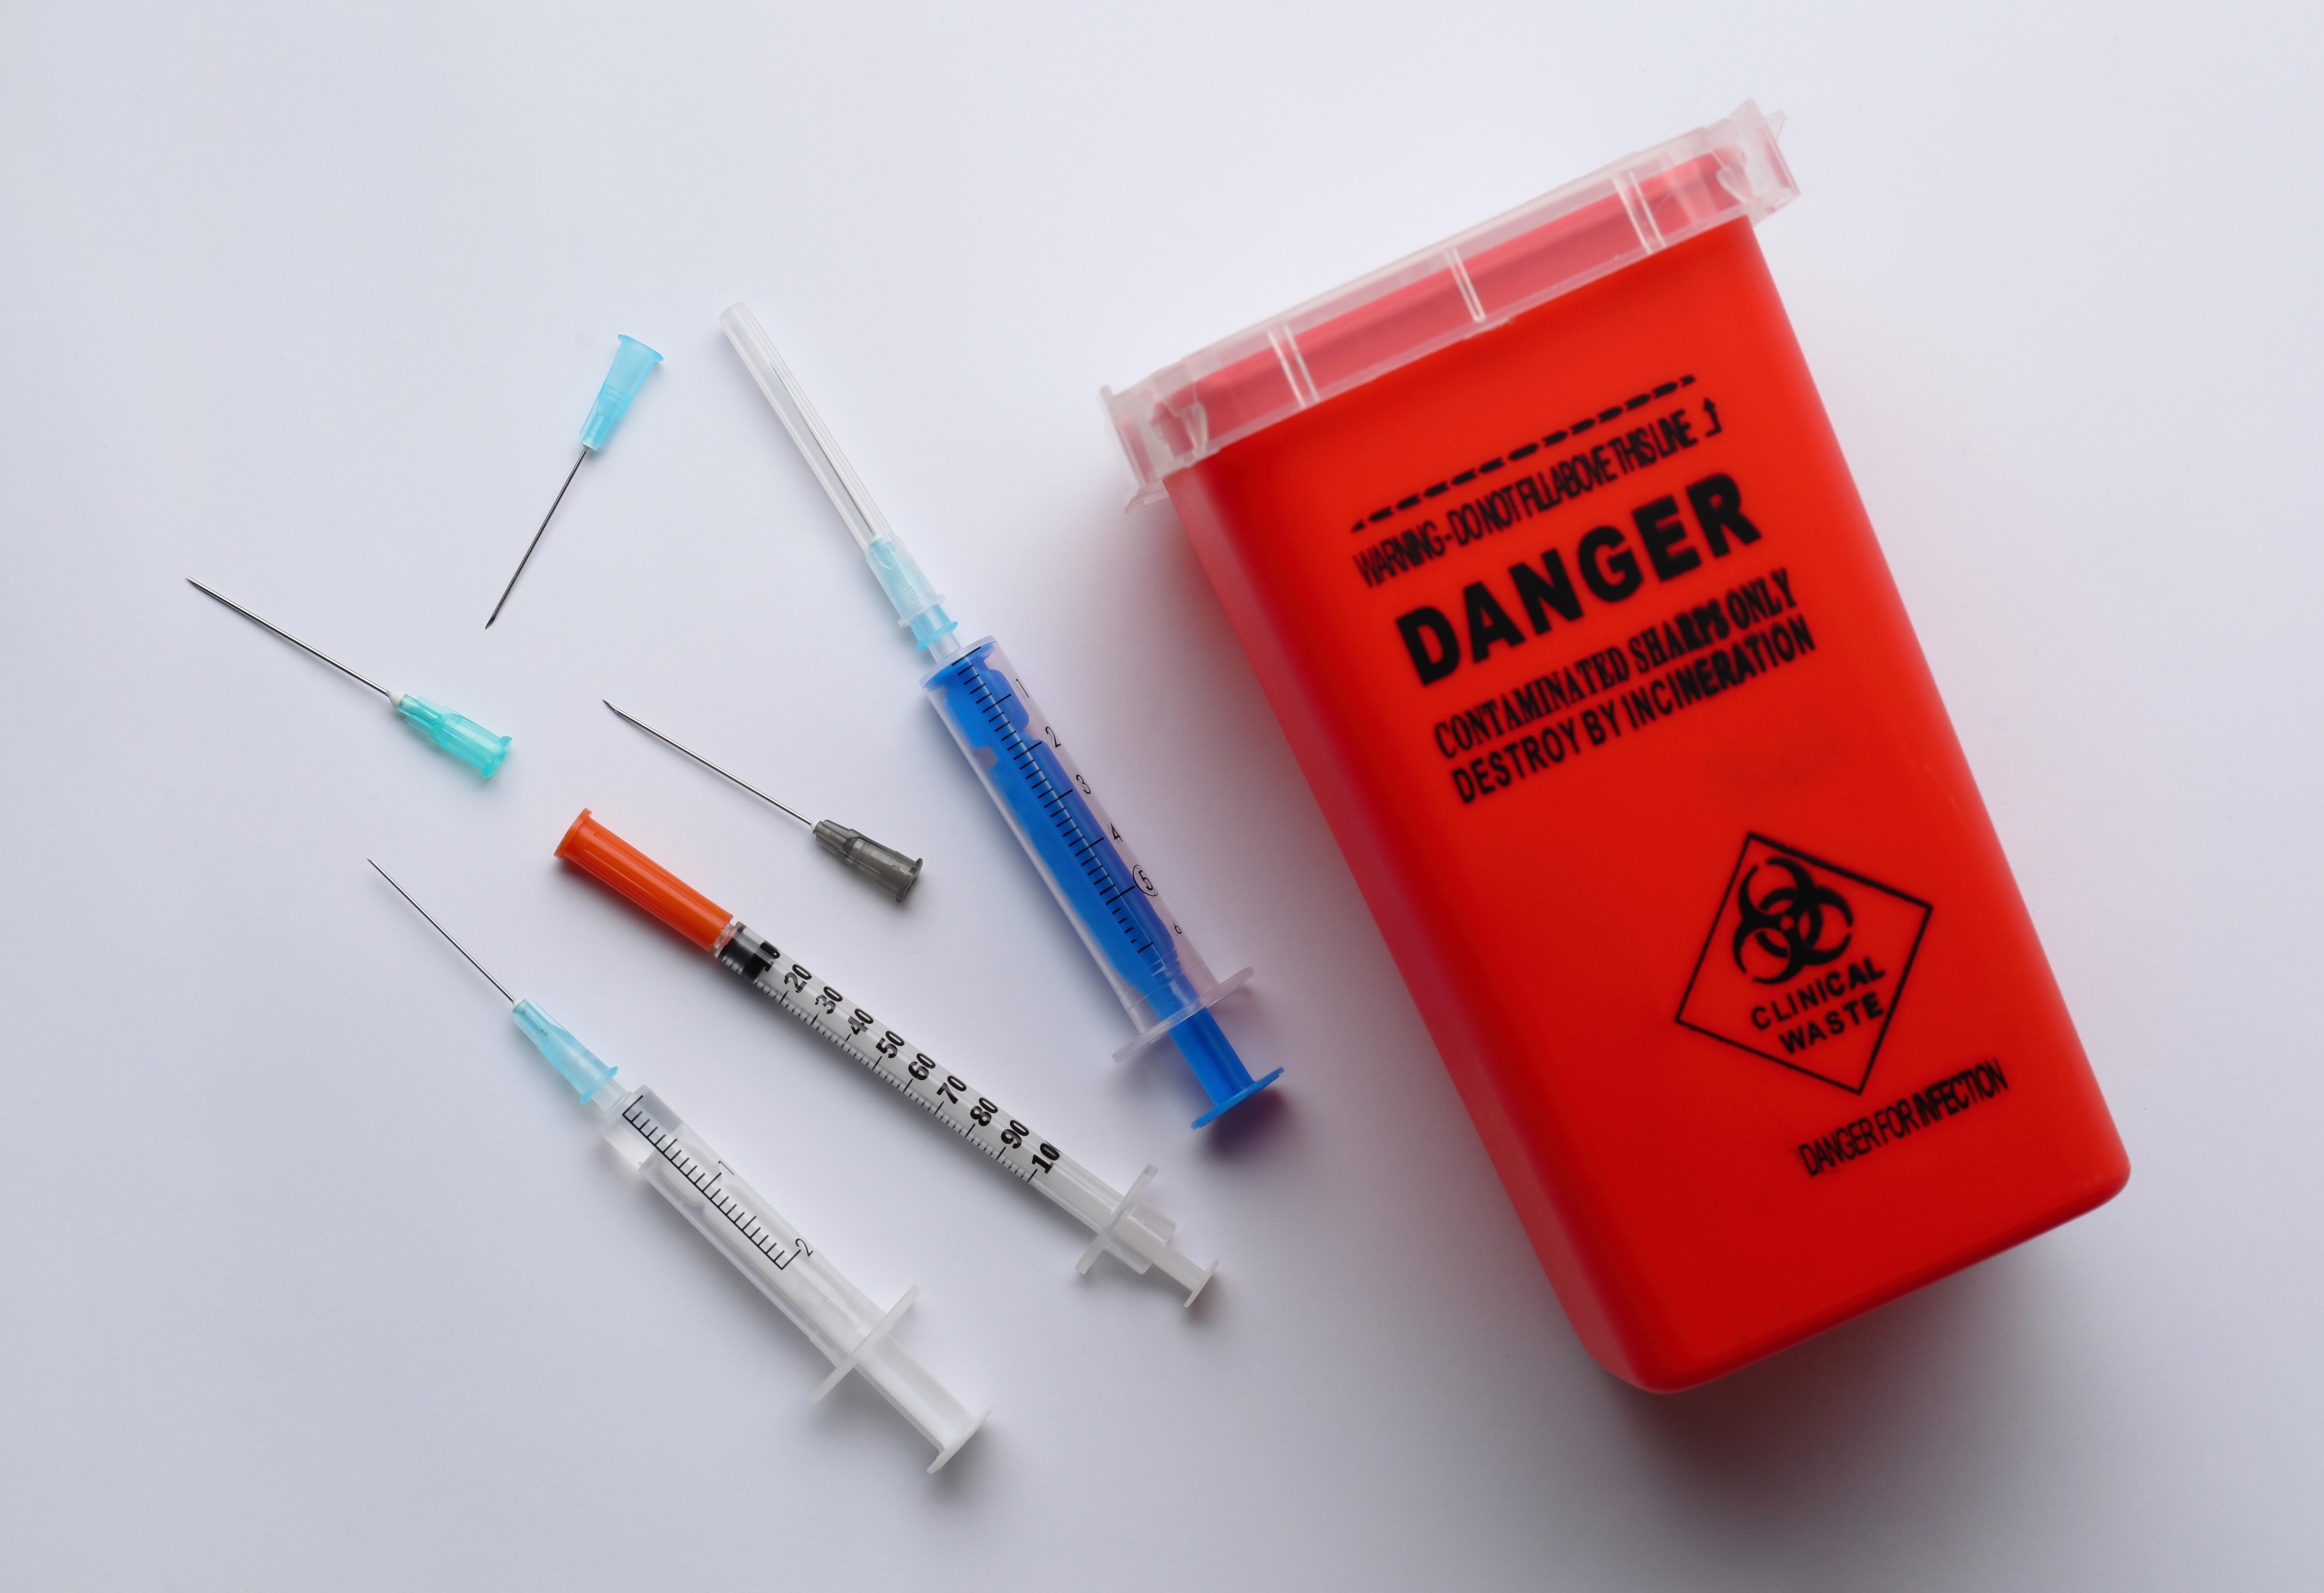 Sharps in Proper Container for Disposal